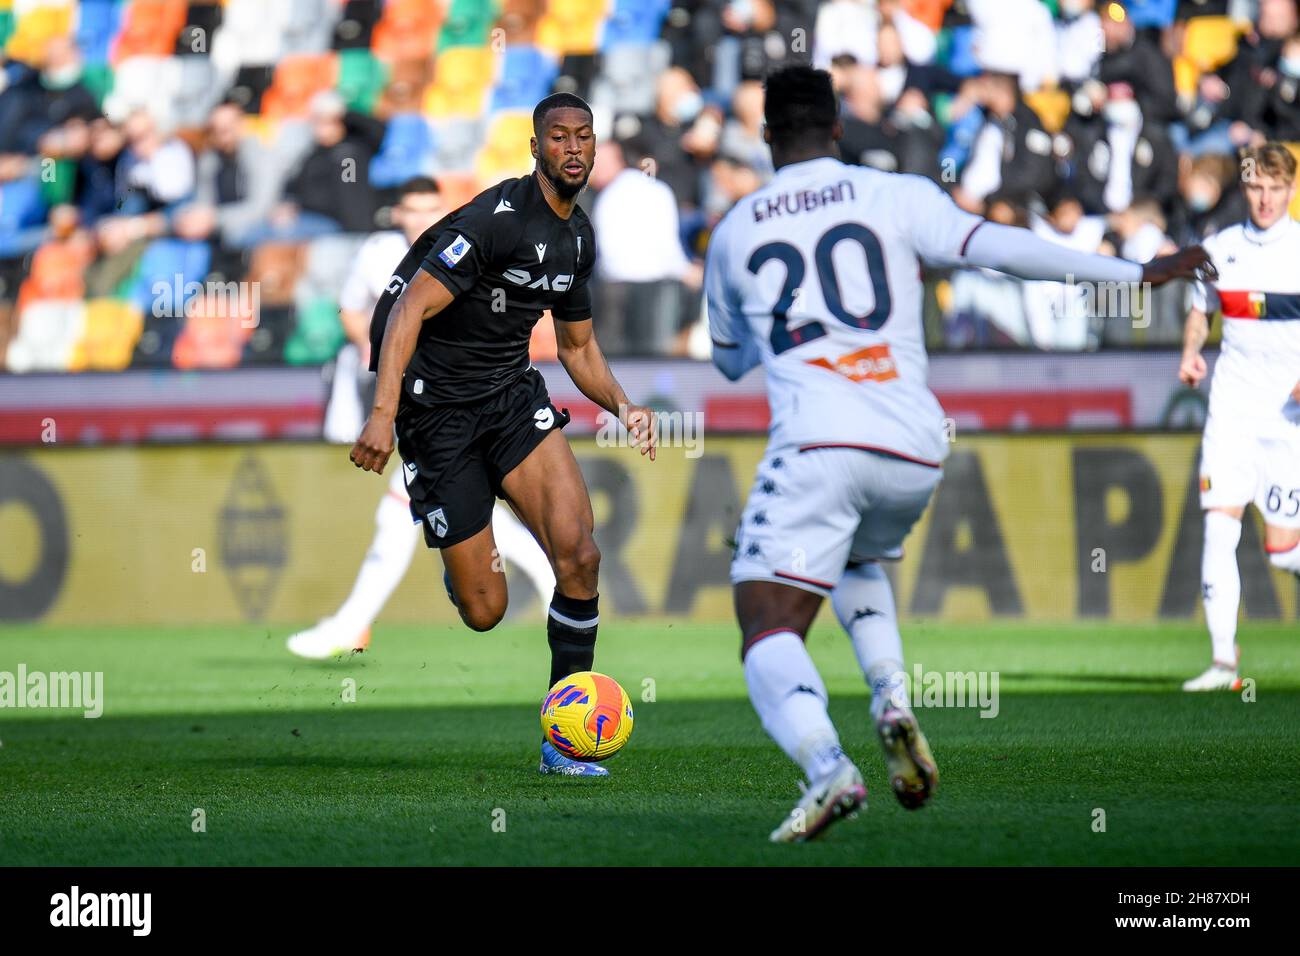 Udine, Italy. 28th Nov, 2021. Friuli - Dacia Arena stadium, Udine, Italy, November 28, 2021, Norberto Bercique Gomes Betuncal (Udinese) carries the ball during Udinese Calcio vs Genoa CFC - italian soccer Serie A match Credit: Live Media Publishing Group/Alamy Live News Stock Photo